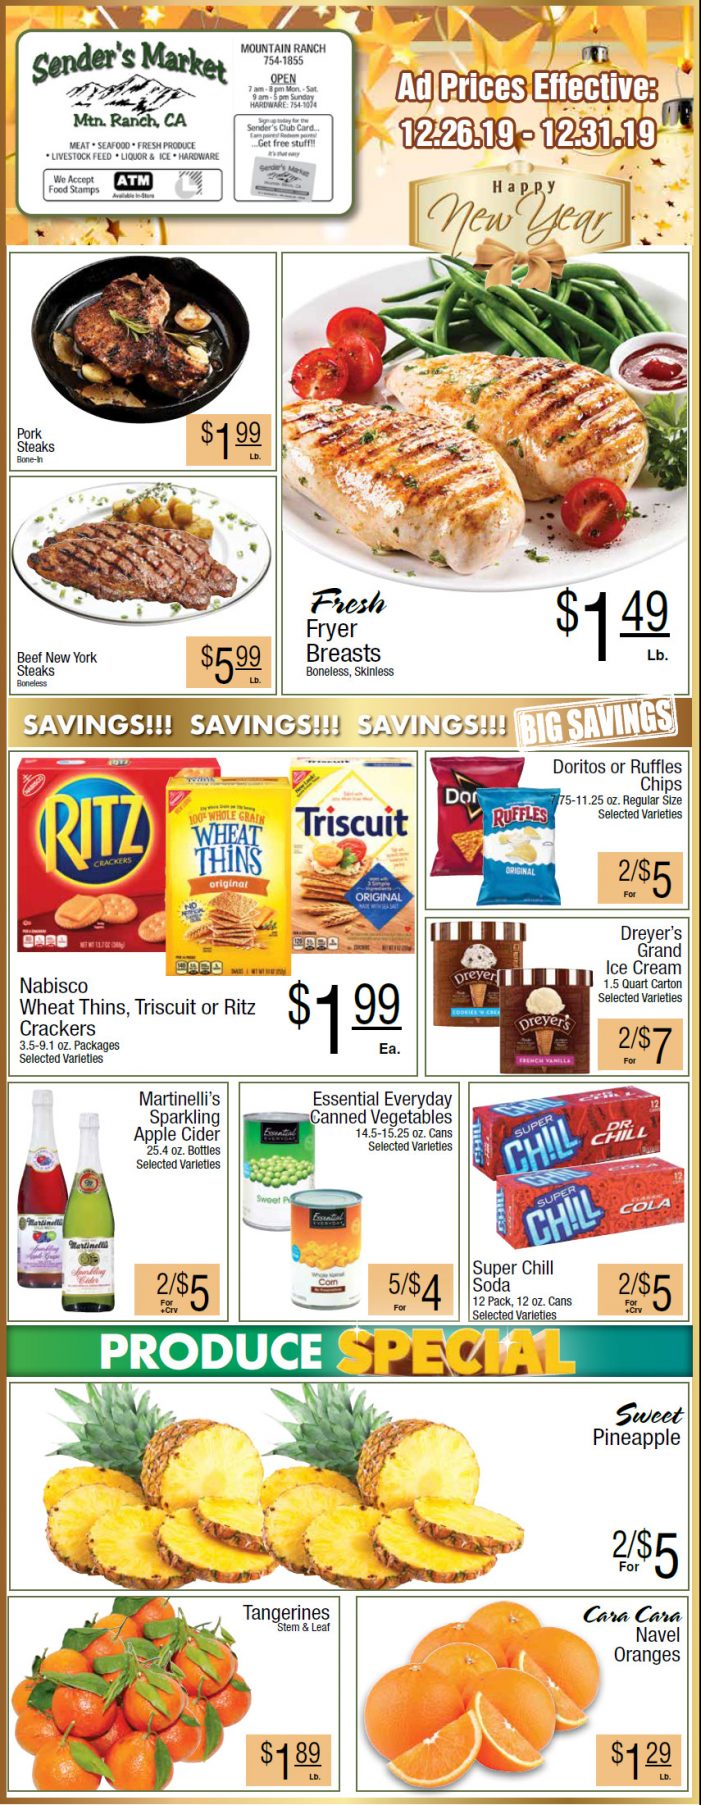 Sender’s Market’s Grocery Ad & Grocery Specials Through December 31st!